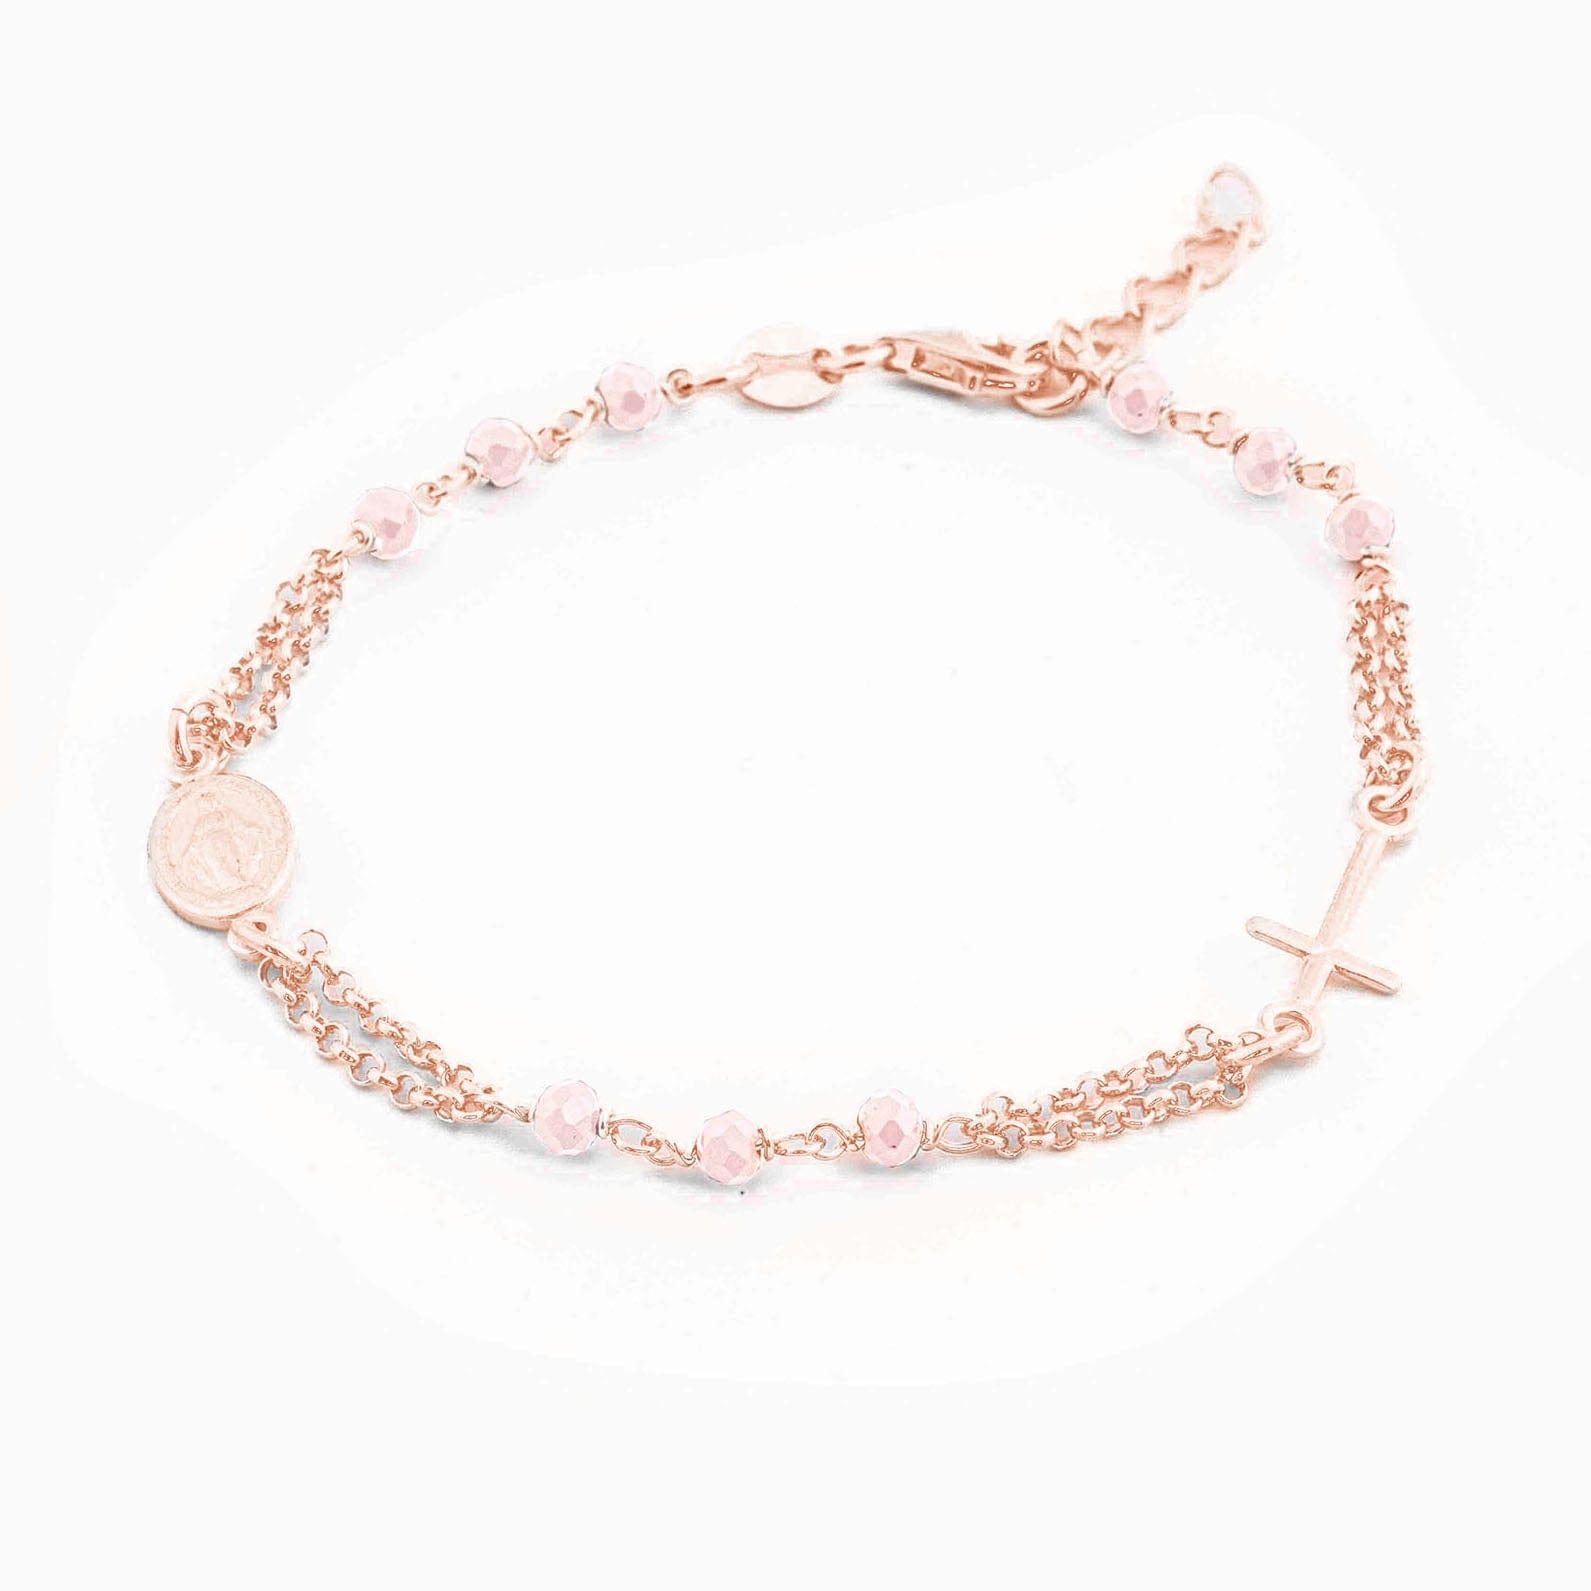 MONDO CATTOLICO Prayer Beads Rose Gold / Cm 17.5 (6.9 in) / Cm 3 (1.2 in) STERLING SILVER ROSARY BRACELET DOUBLE CHAIN ROSE FACETED BEADS